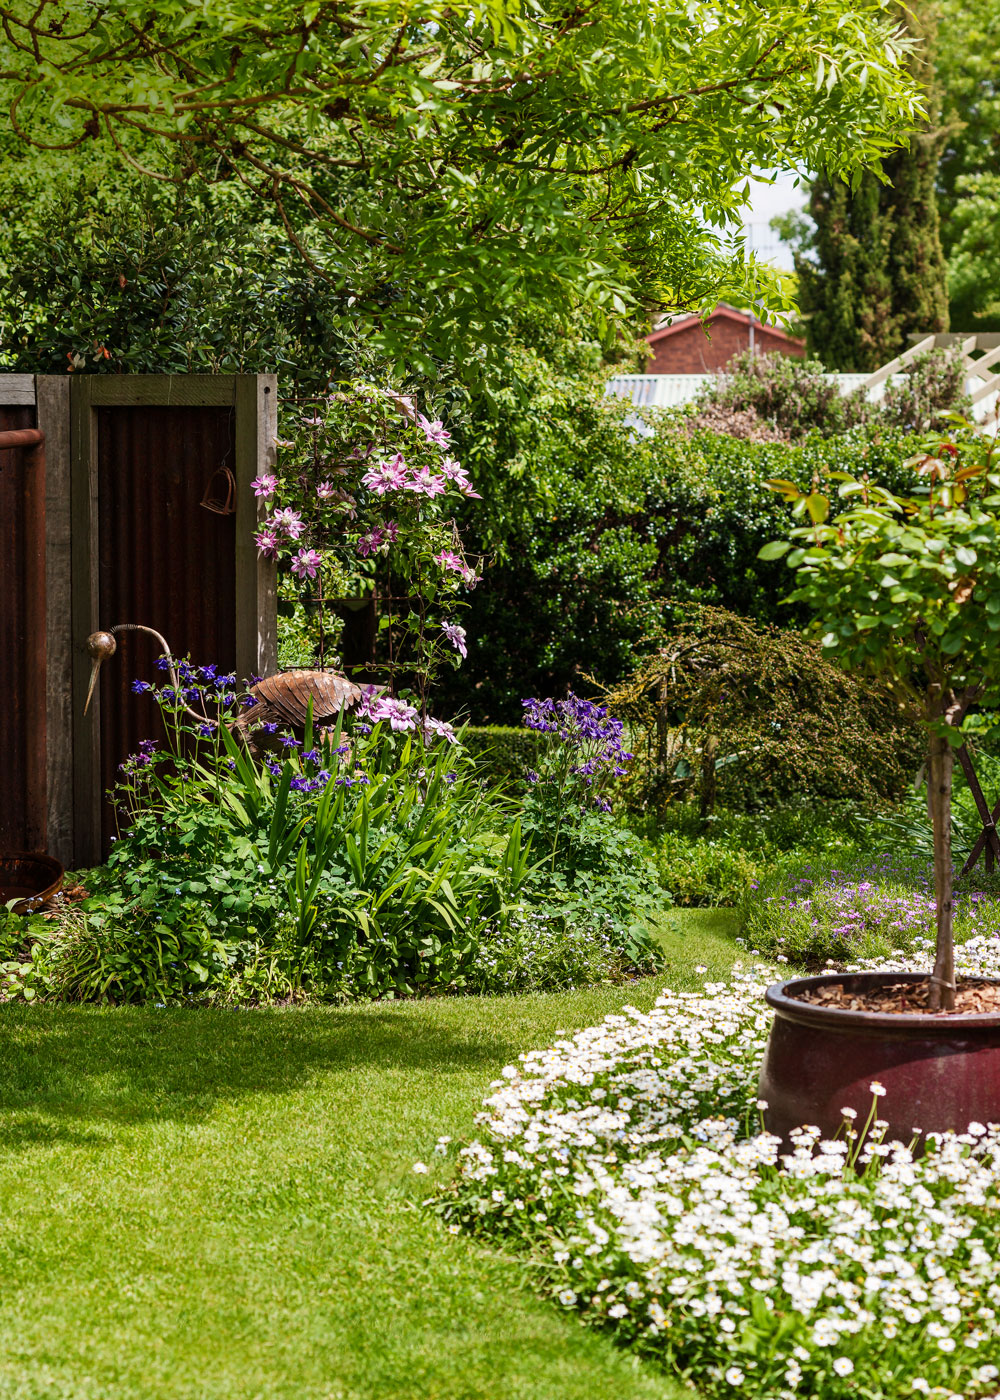 Create a country style garden | Better Homes and Gardens